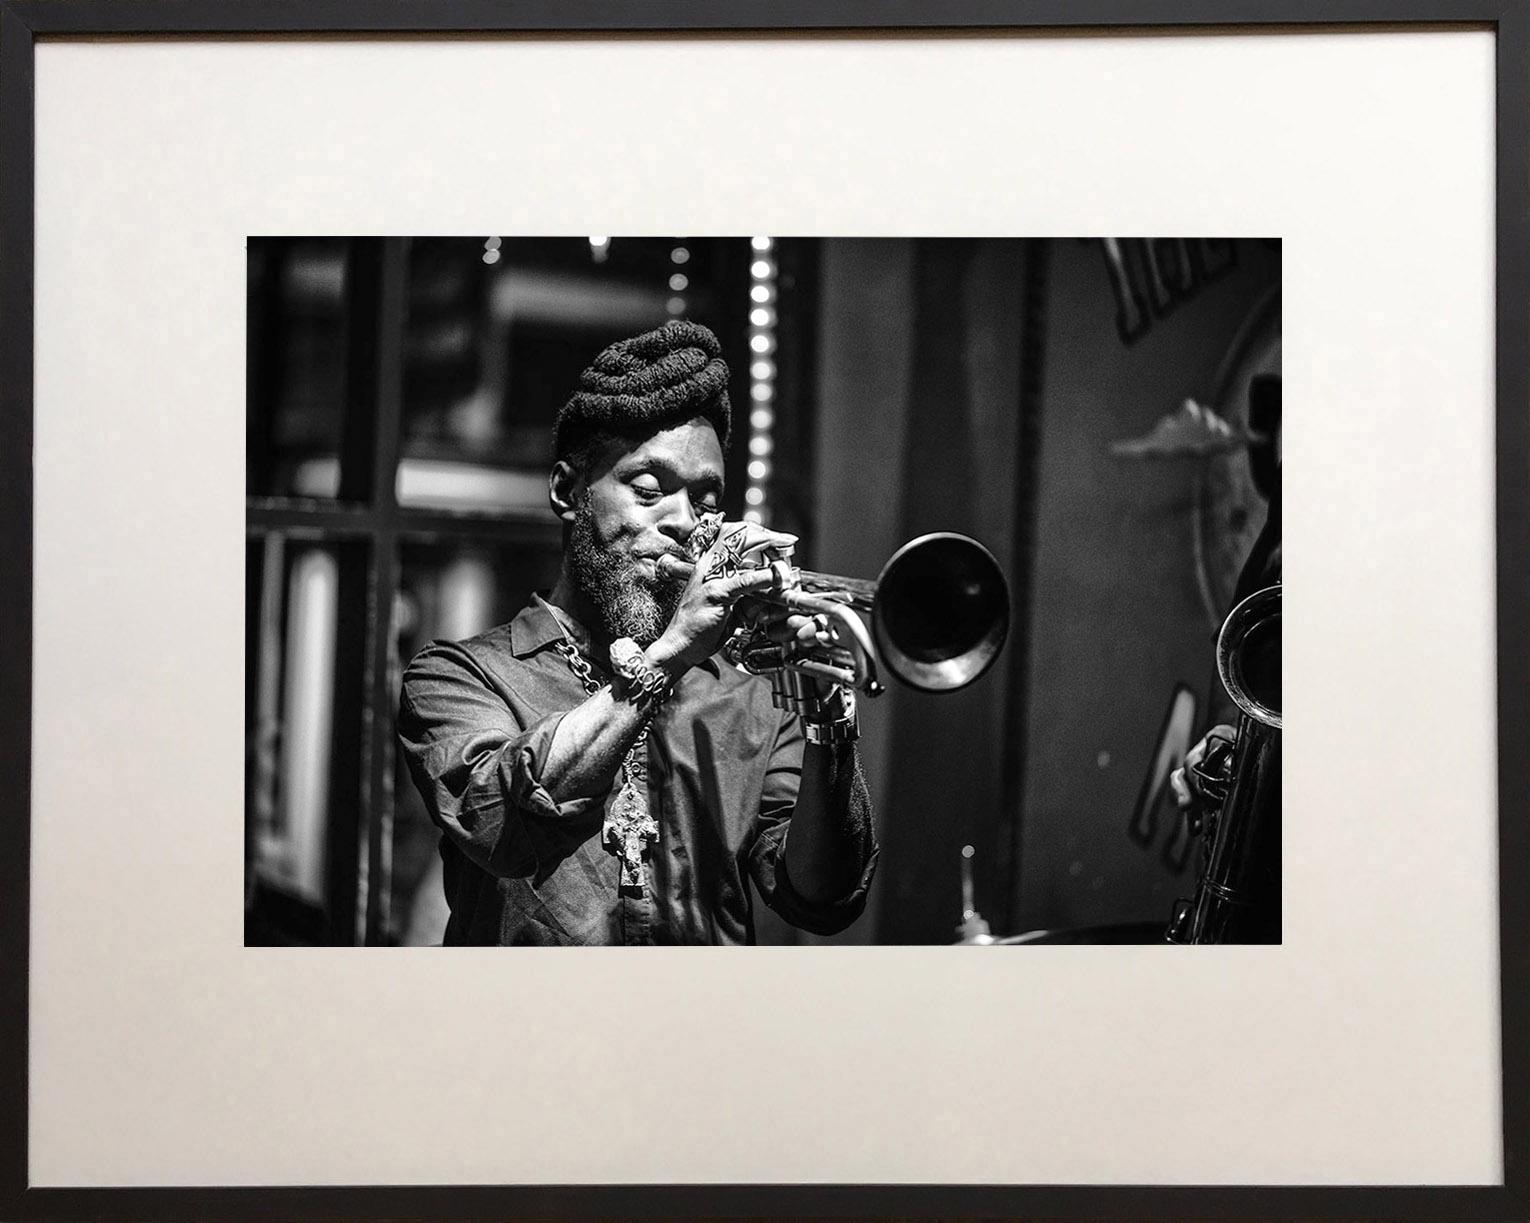 A Moment with Mario by James Sparshatt. Silver gelatin photo with wooden frame